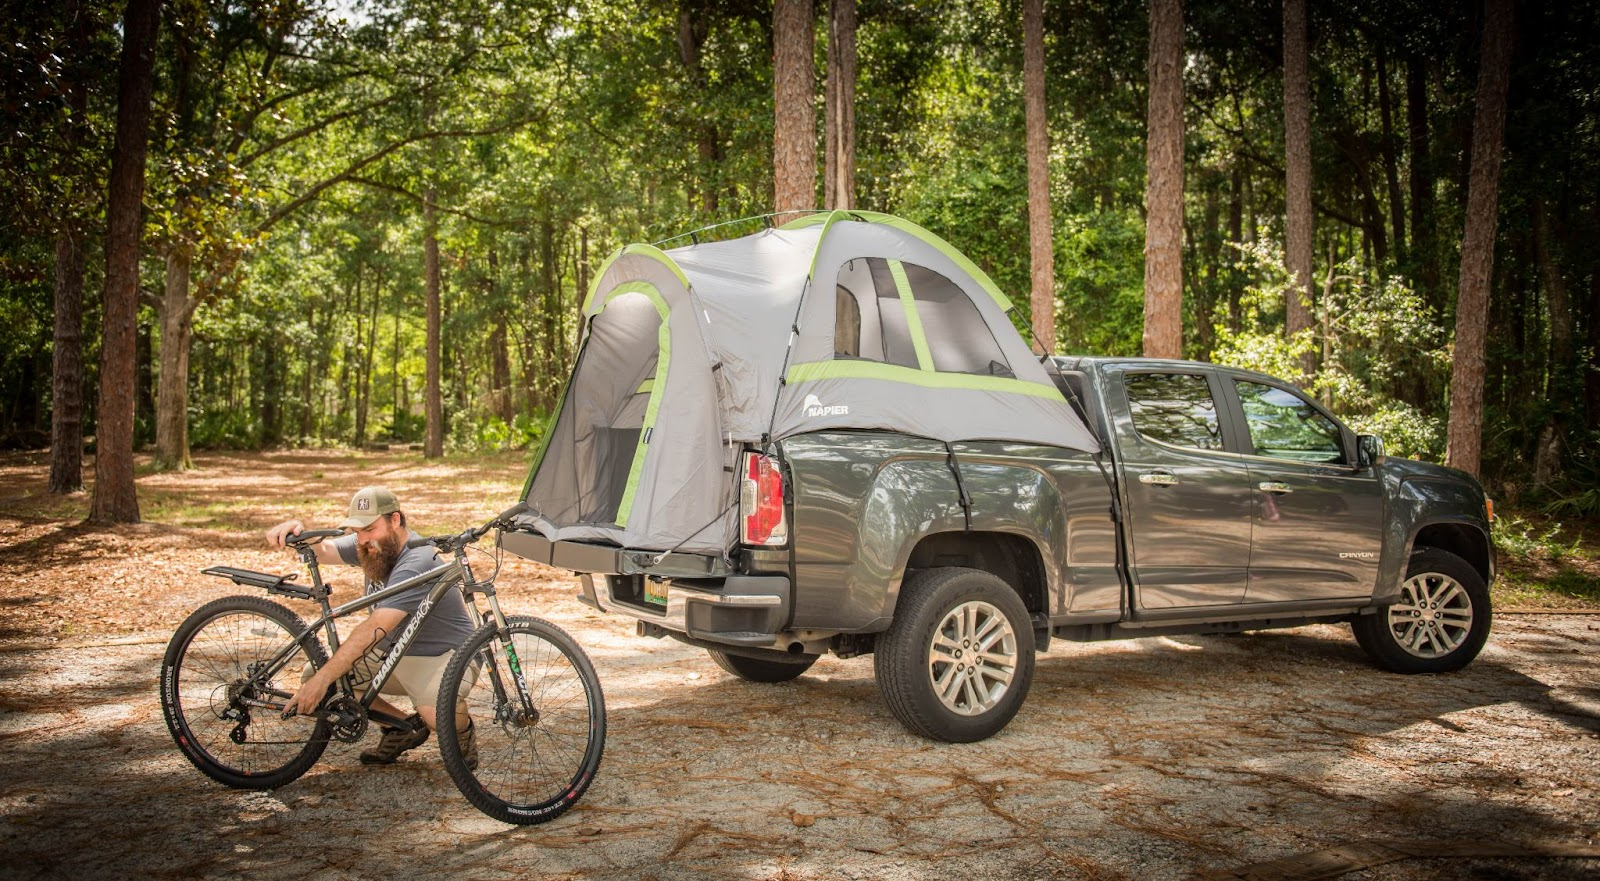 What are truck bed tents? Sportz tent is seen parked at a campsite with a deer